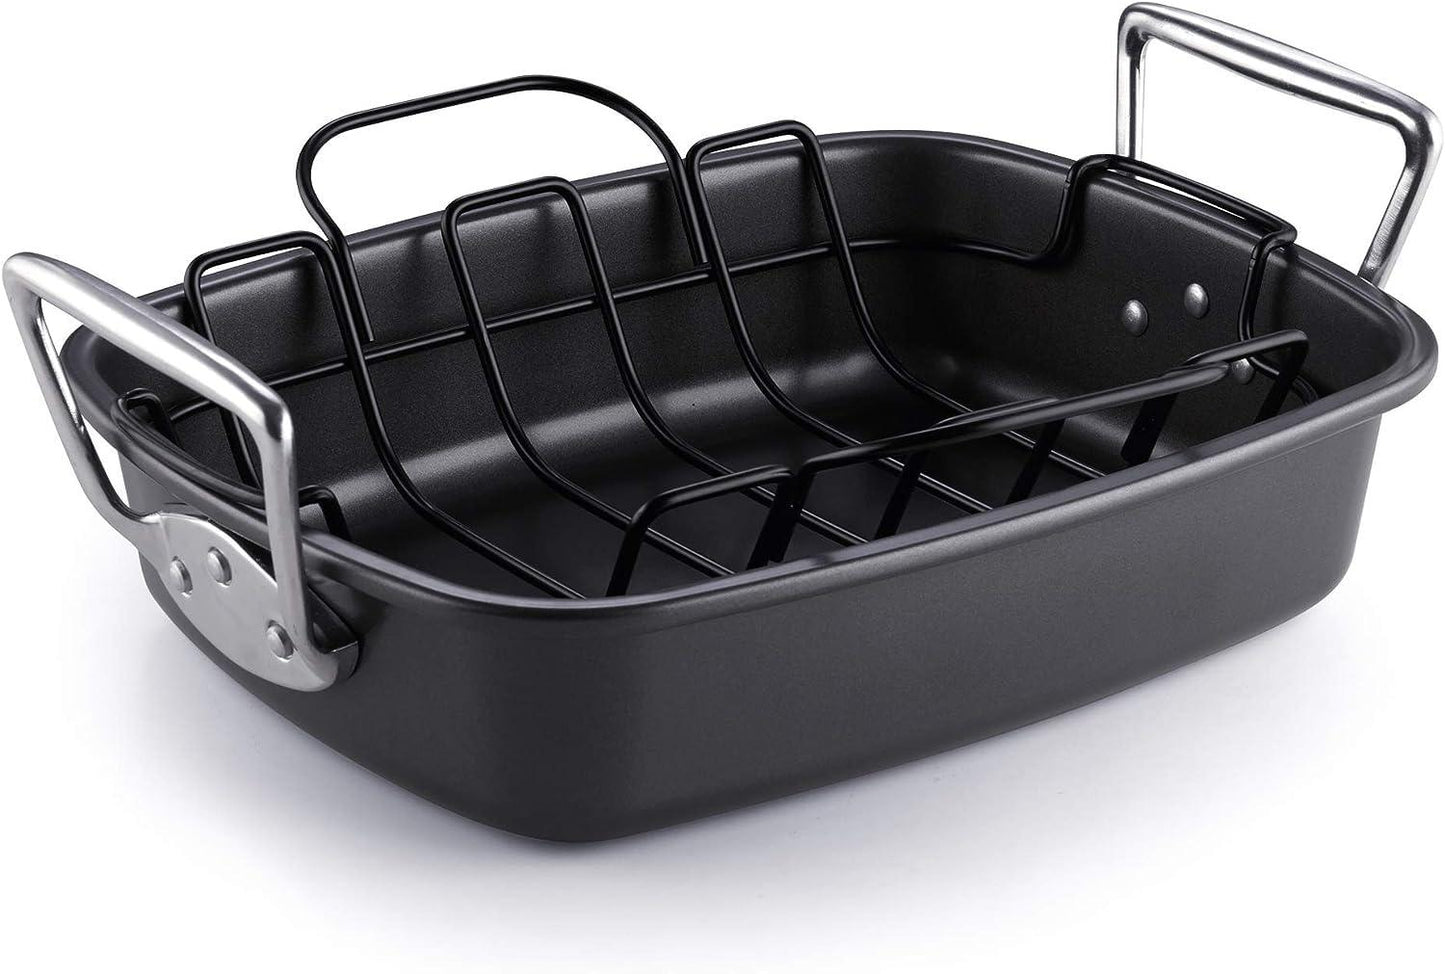 Cook N Home Nonstick Roasting Pan Bakeware Roaster with Rack, 17x13-inches, Black - CookCave